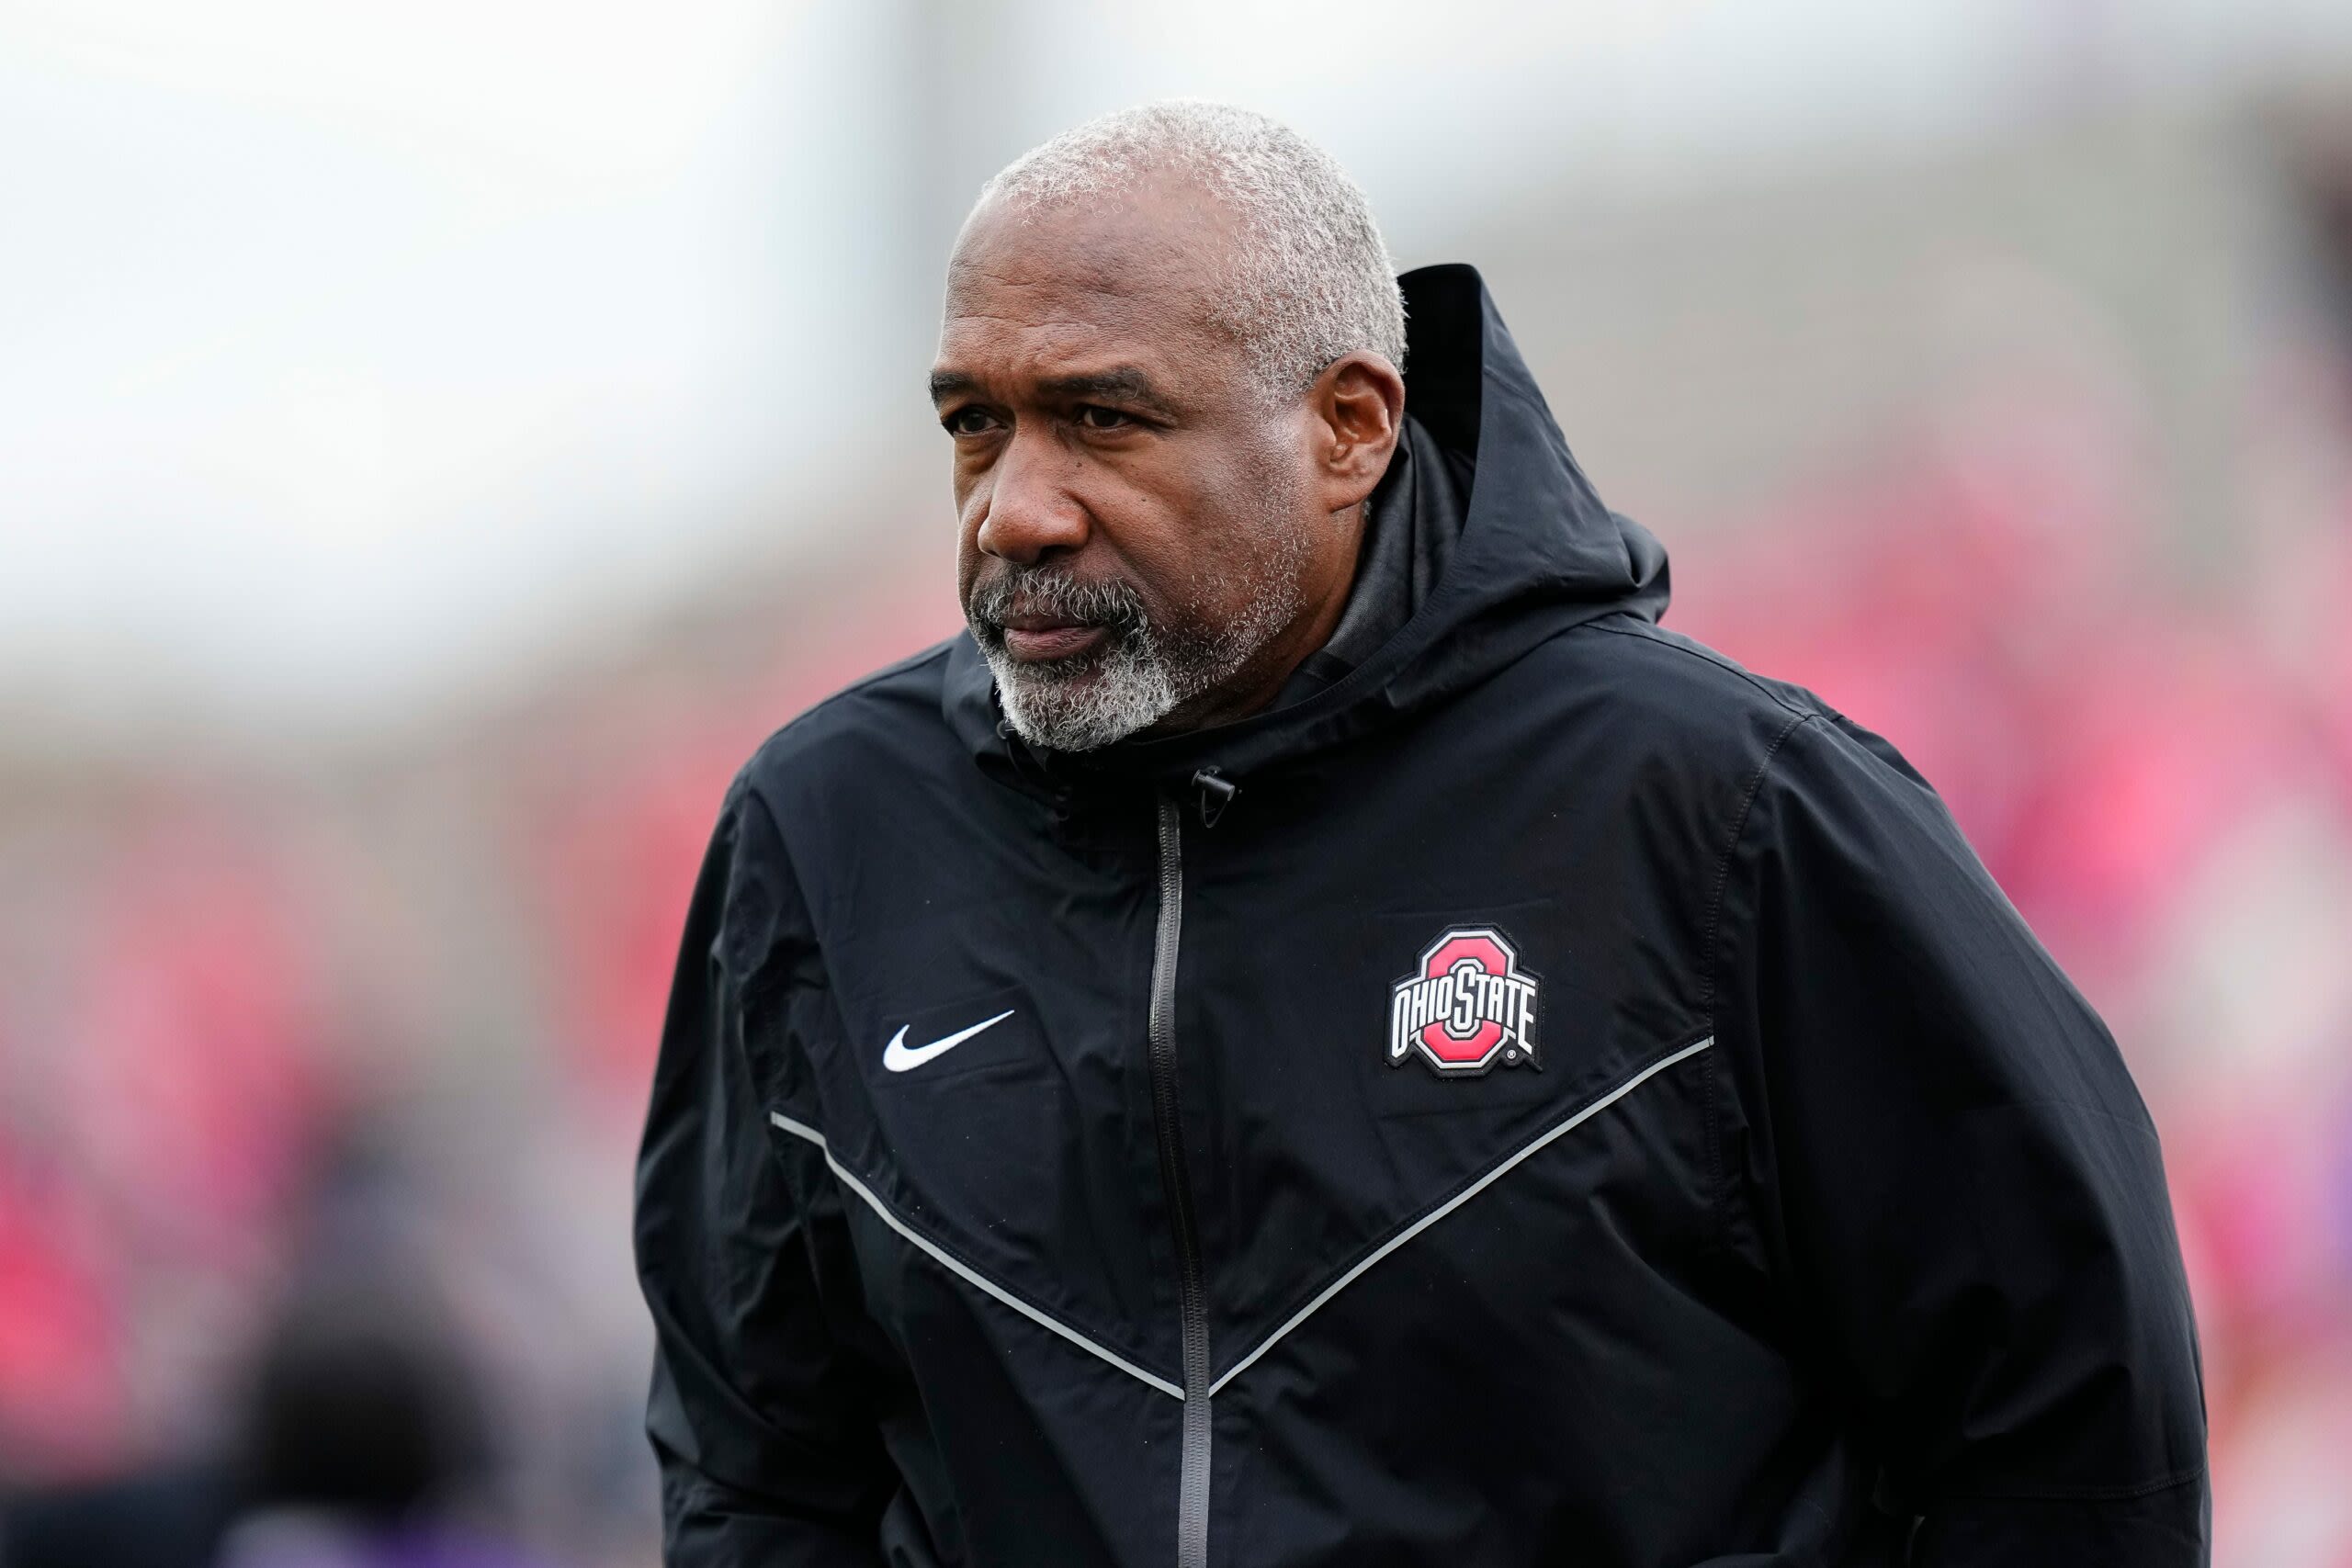 Outgoing Ohio State AD Gene Smith believes Michigan wins over Ohio State should have asterick